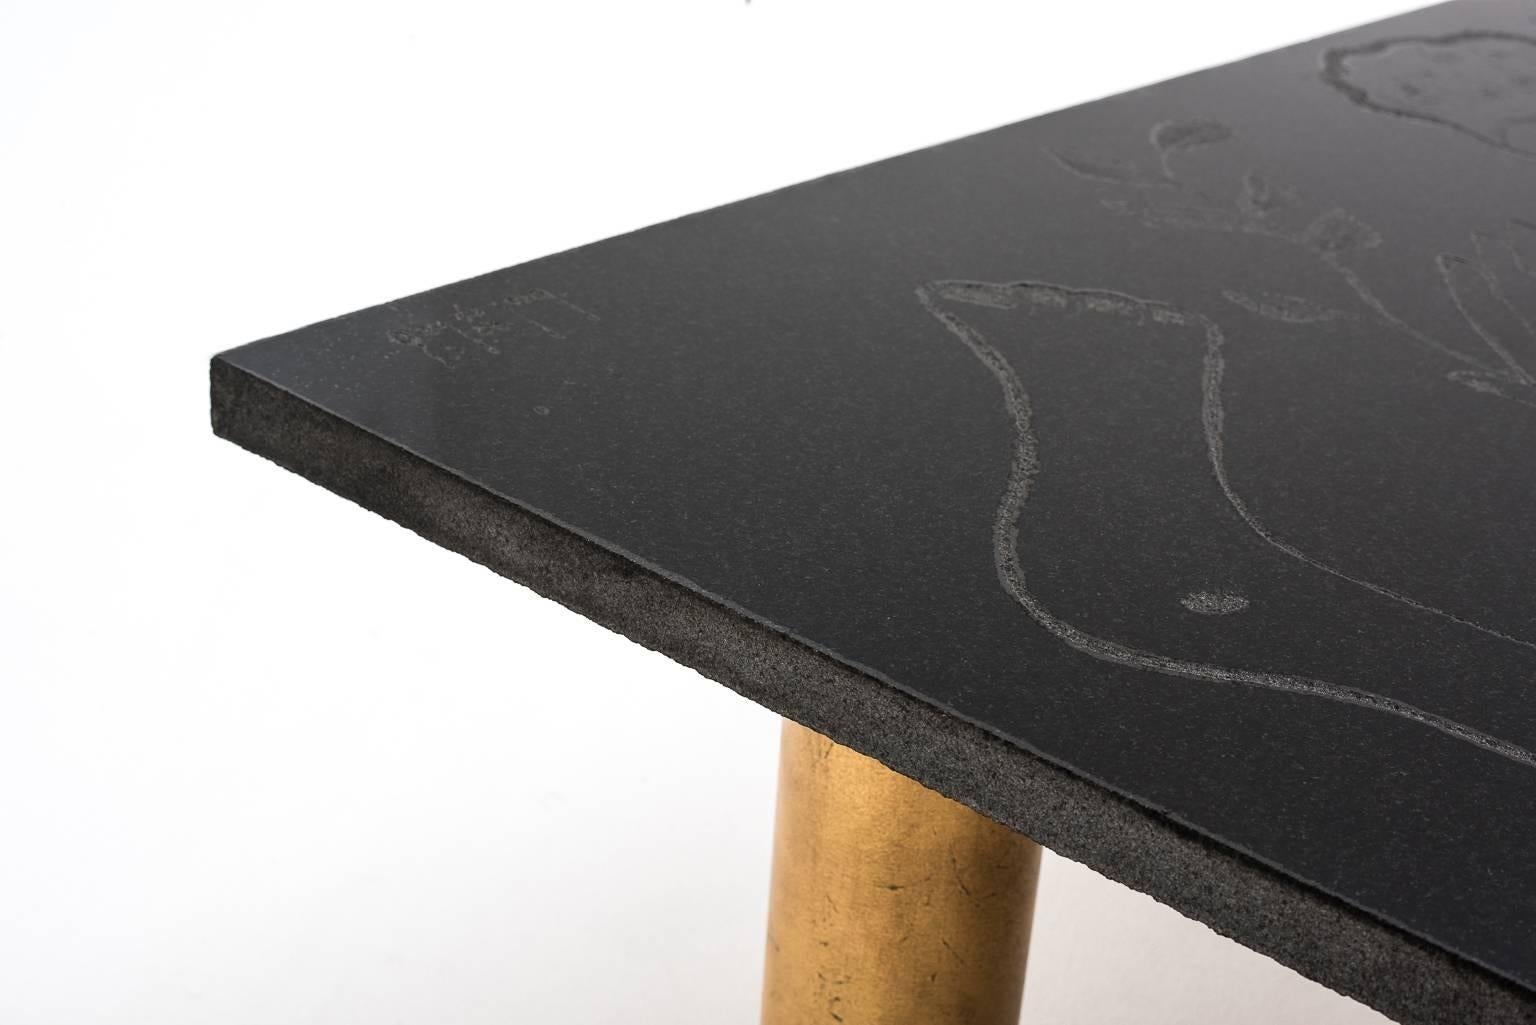 Mid-Century Modern Artistic Engraved Black Granite and Gild Midcentury Coffee Table by Guy de Jong